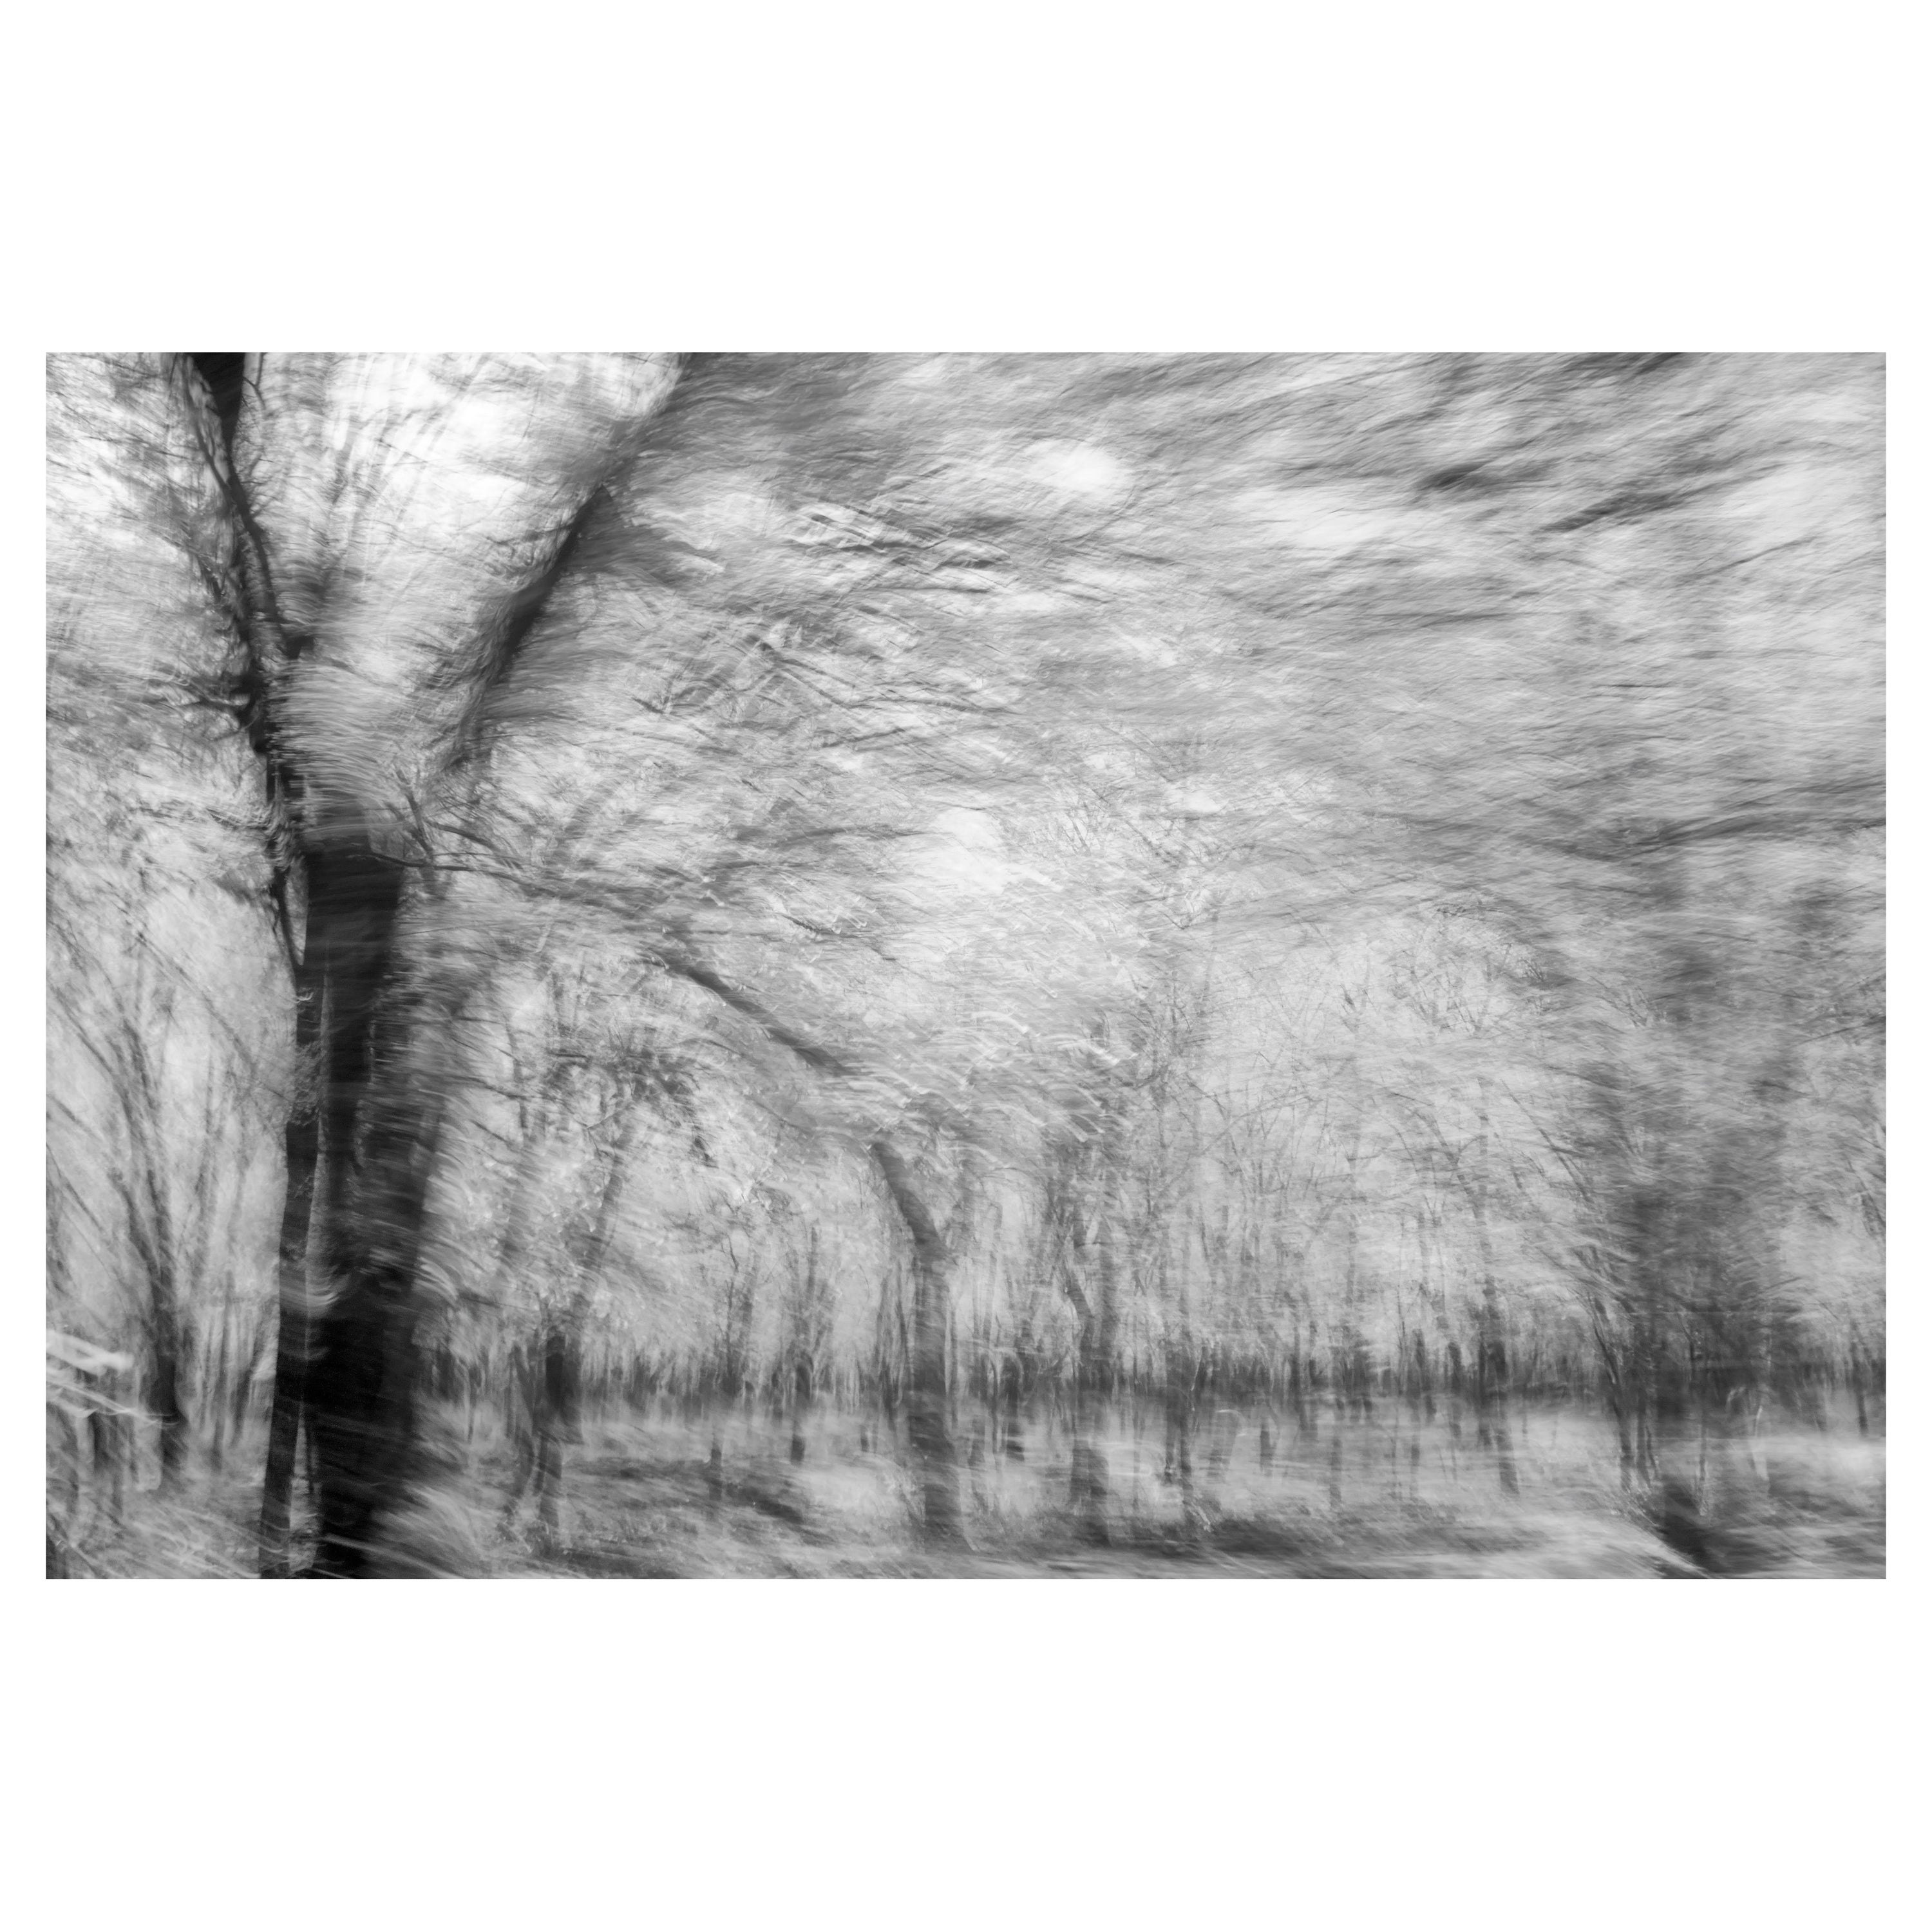 Abstract Photograph Aditya Dicky Singh -  Photographie de paysage Nature Grande abstraction Arbres Vie sauvage Inde Noir Blanc